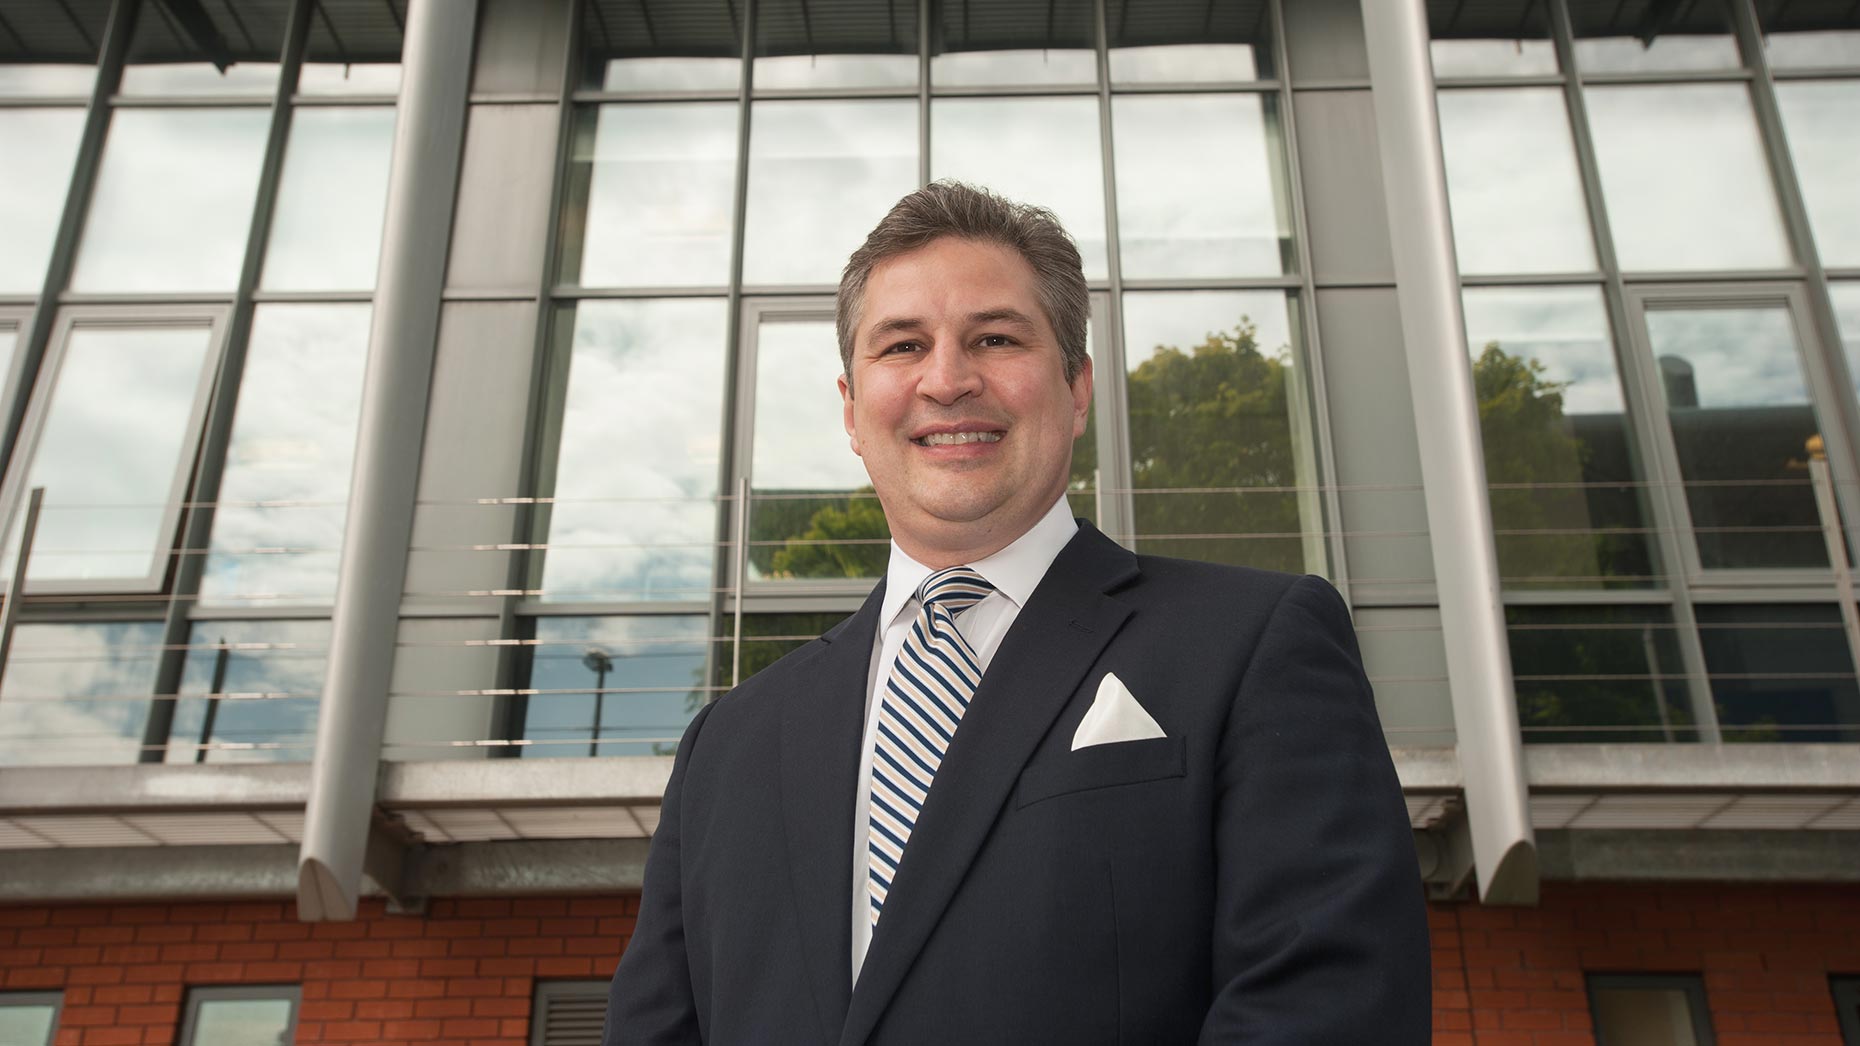 Gary Headland, CEO of Lincoln College Group